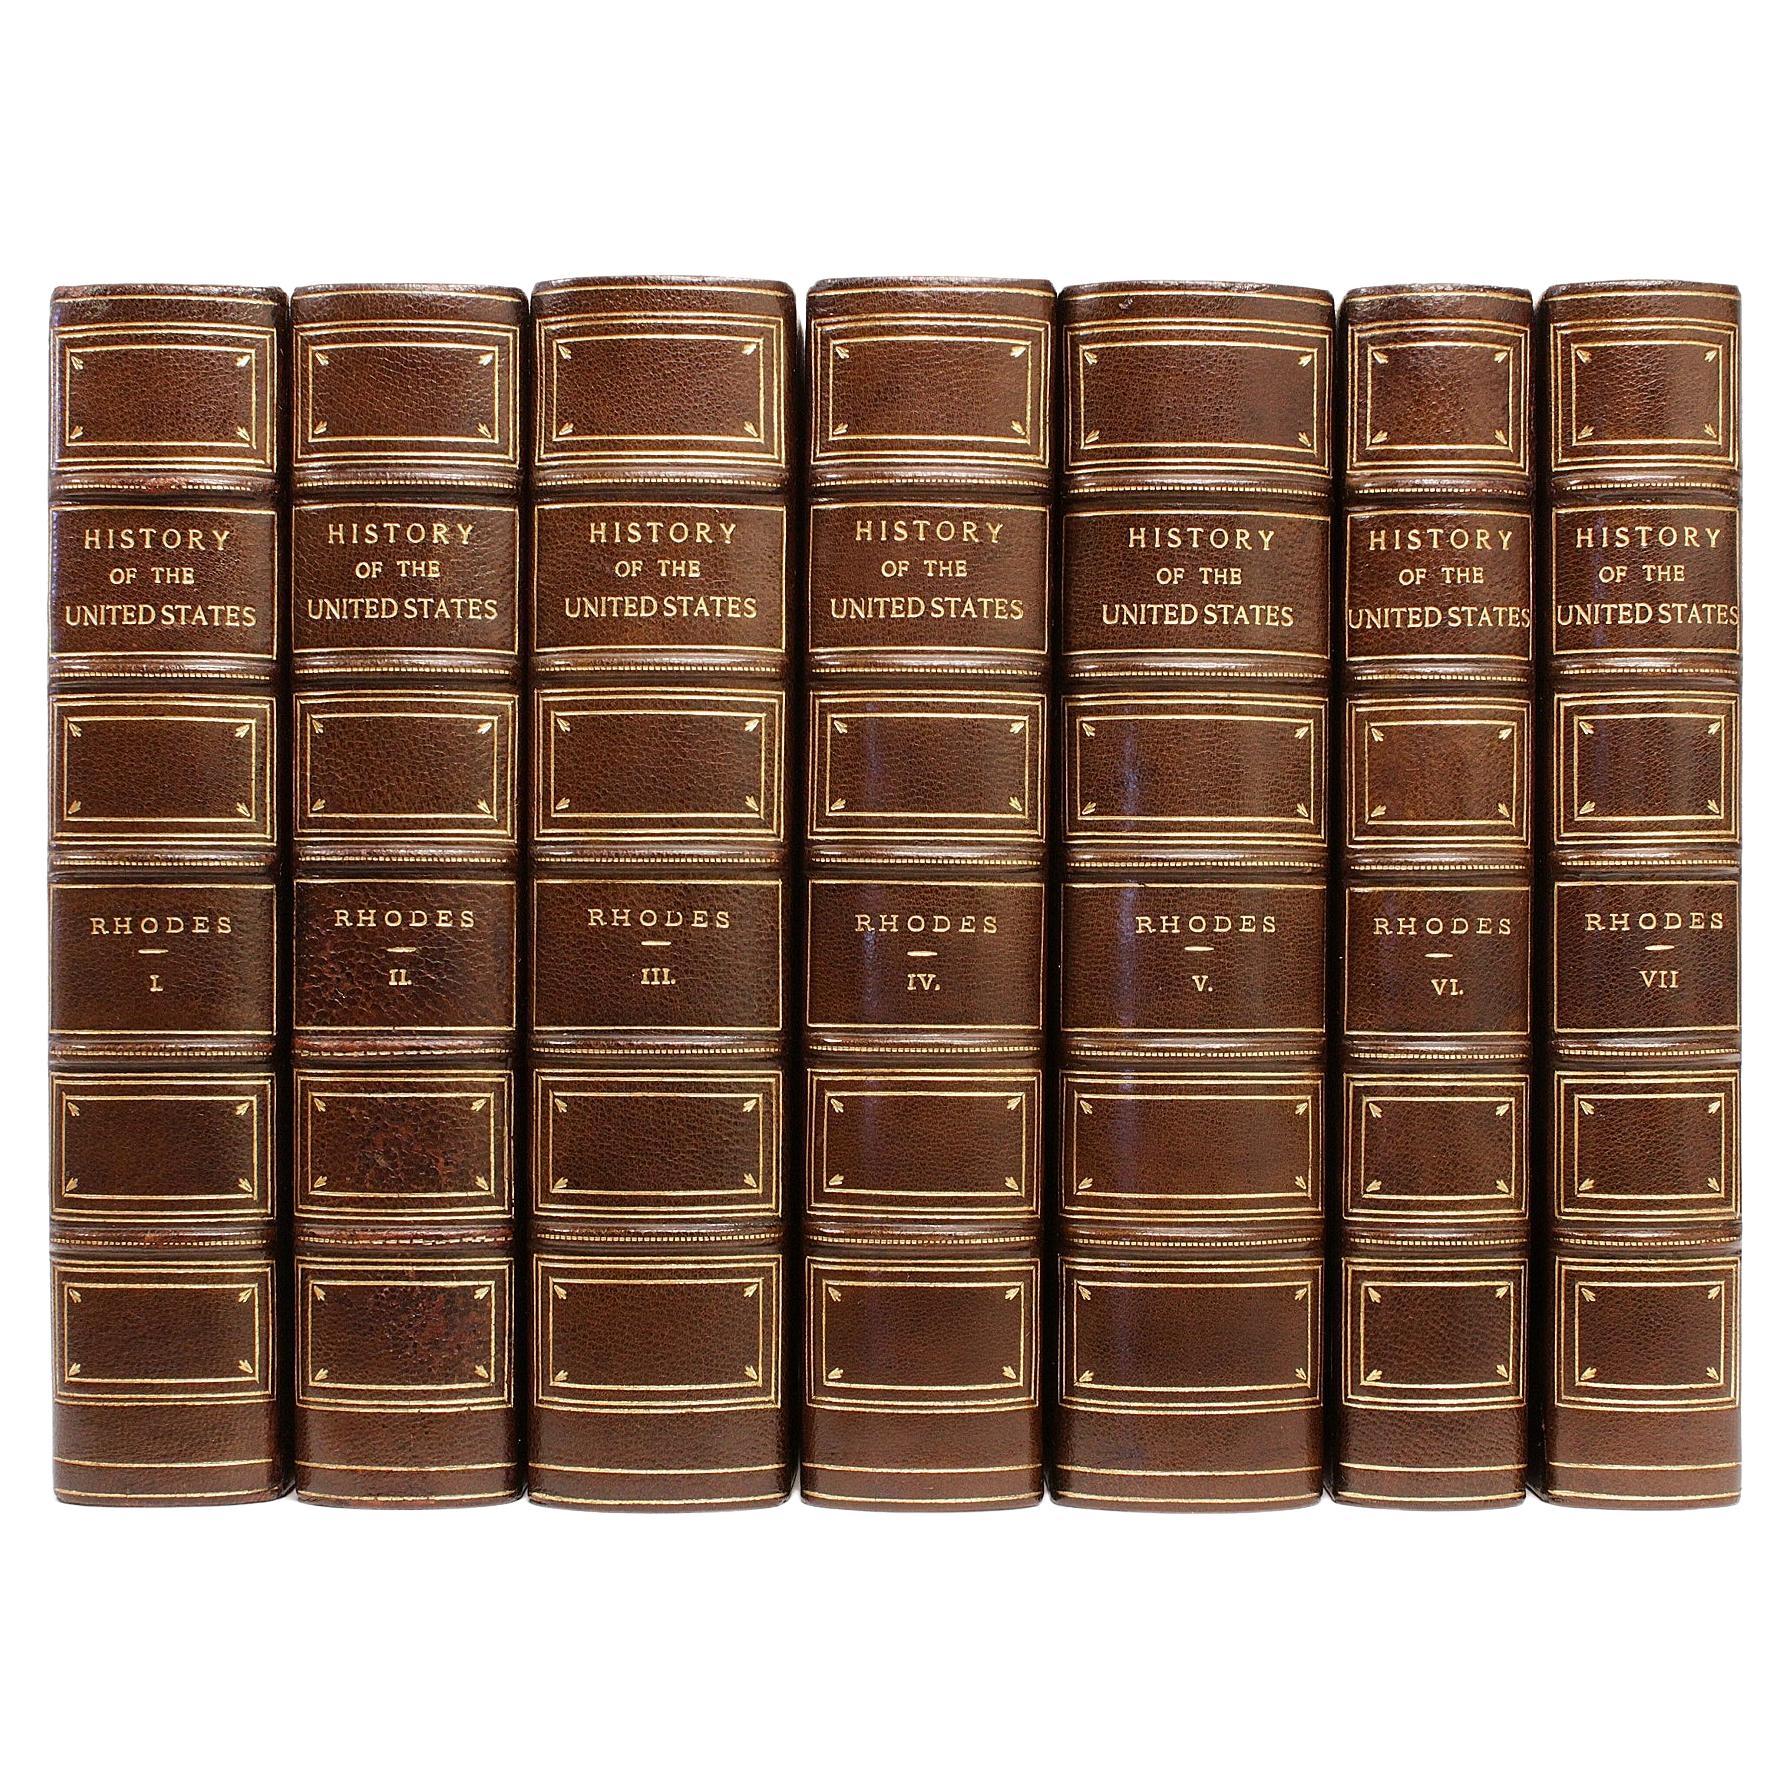 Rhodes, James Ford, History of the United States, 7 Vols, in a Fine Binding For Sale